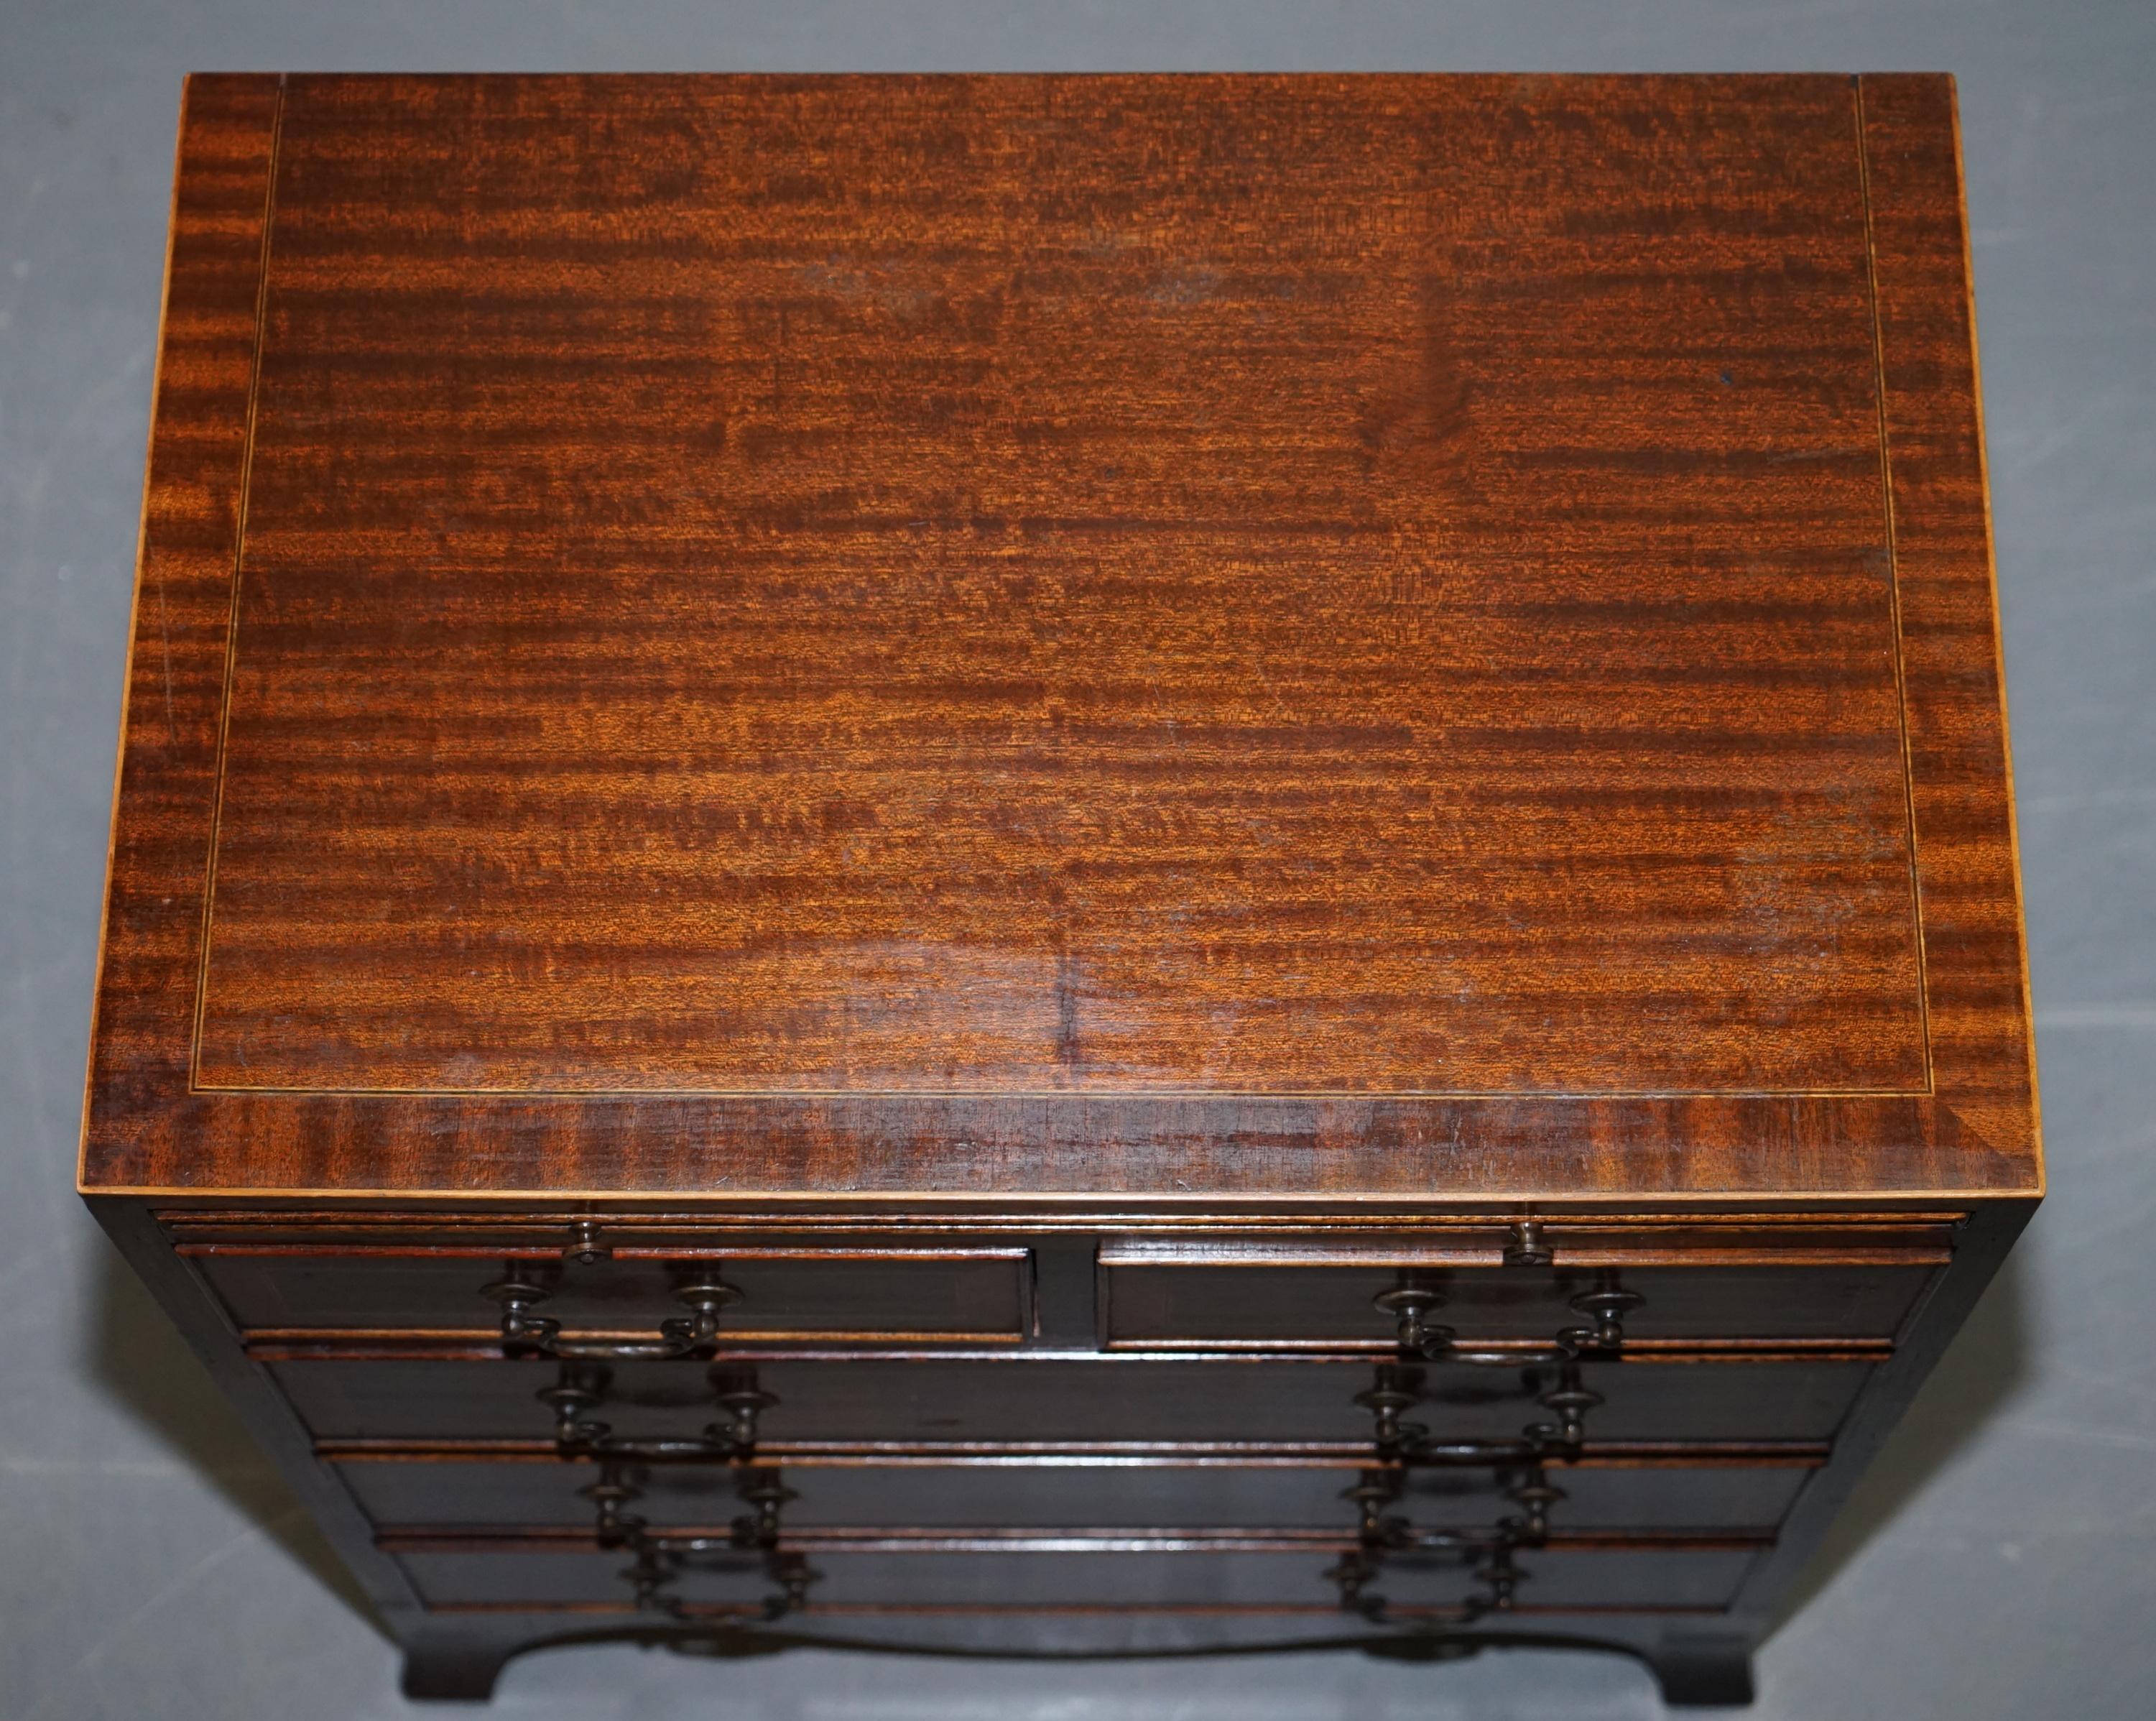 Leather Pair of Stunning Flamed Hardwood Side Table Sized Chests of Drawers Serving Tray